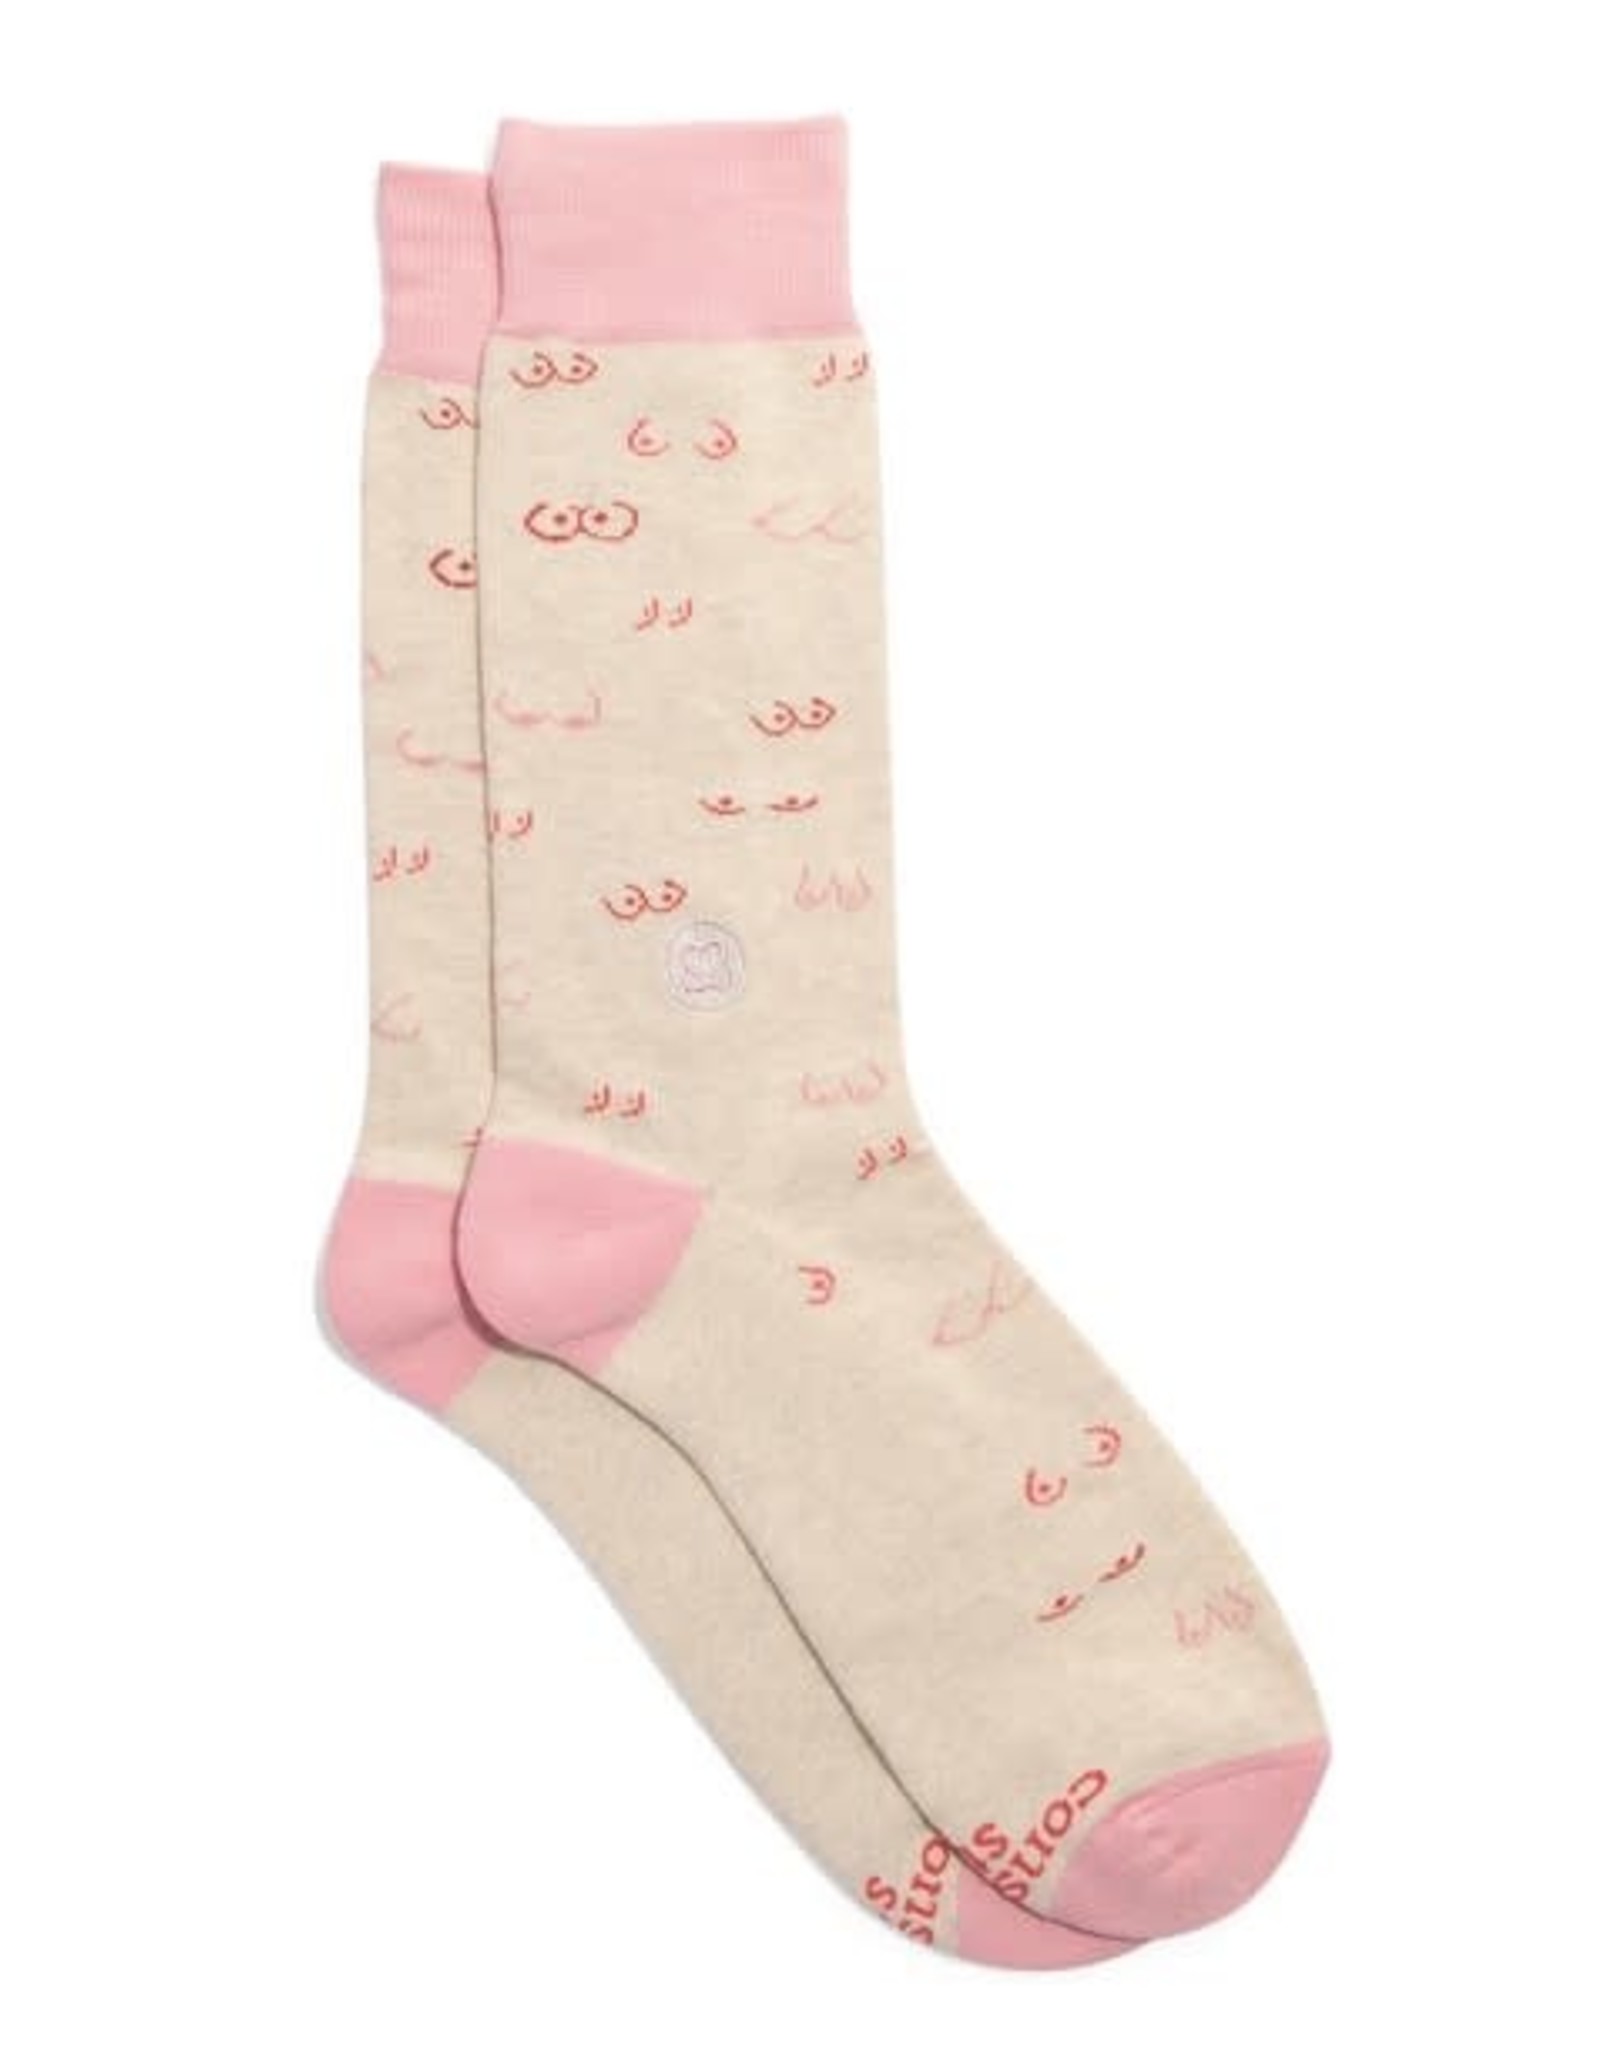 Conscious Step Socks that Support Self-Checks (All Sizes)